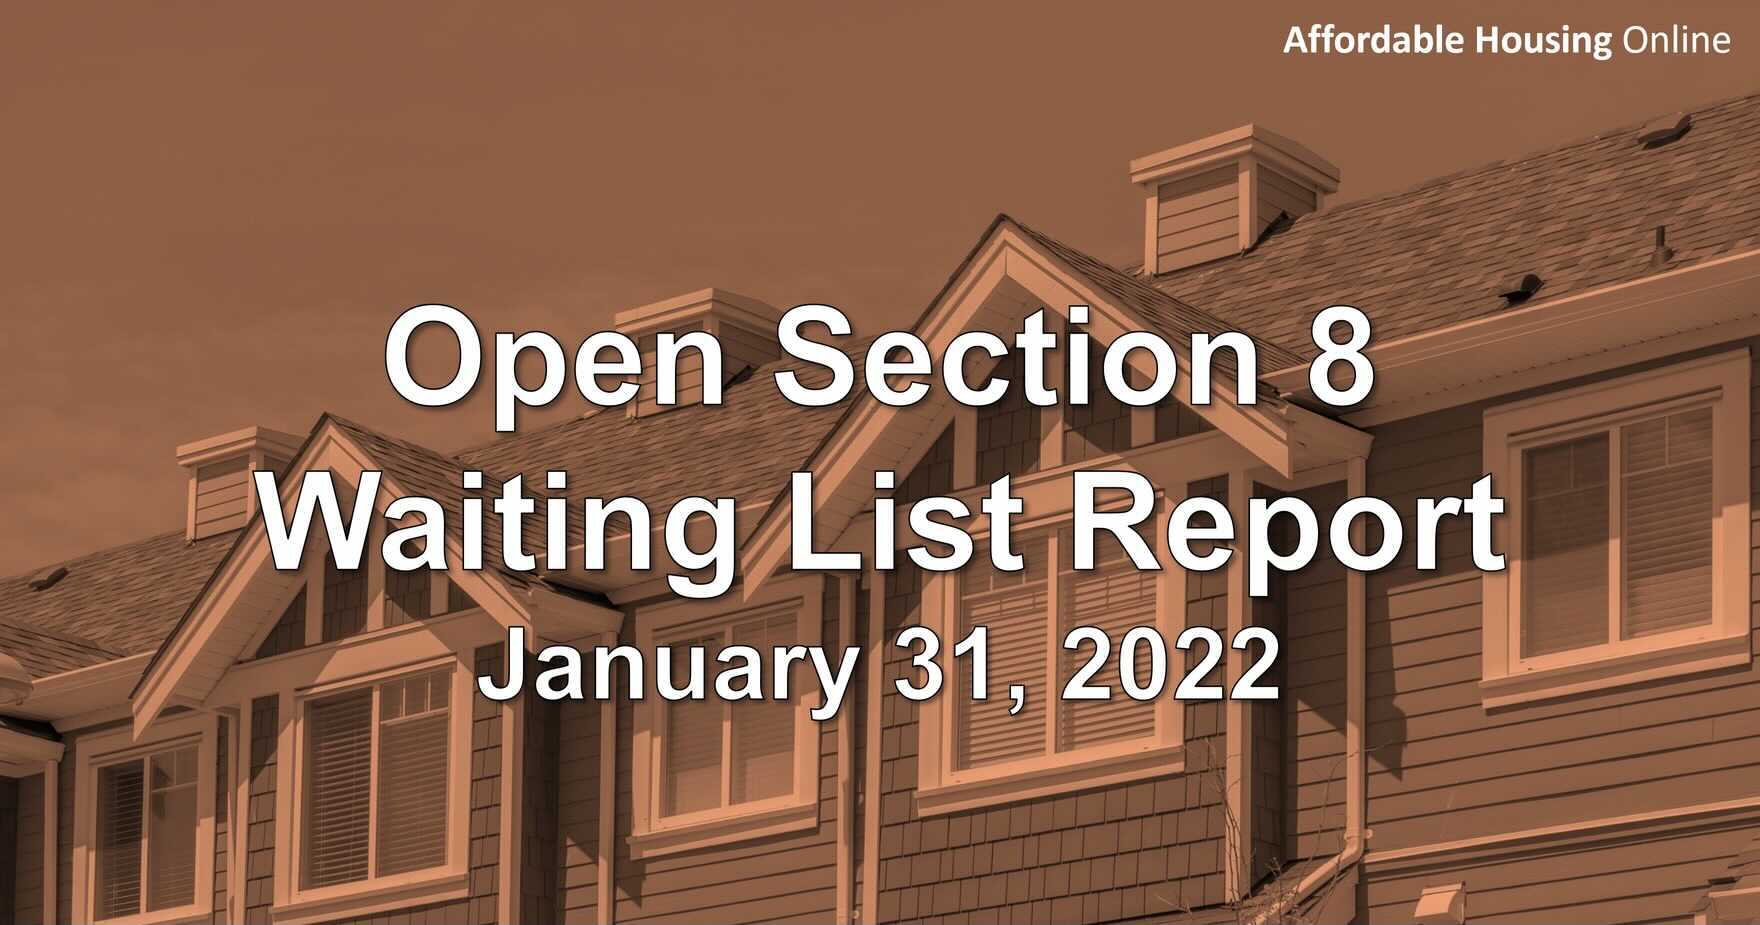 Open Section 8 Waiting List Report: January 31, 2022